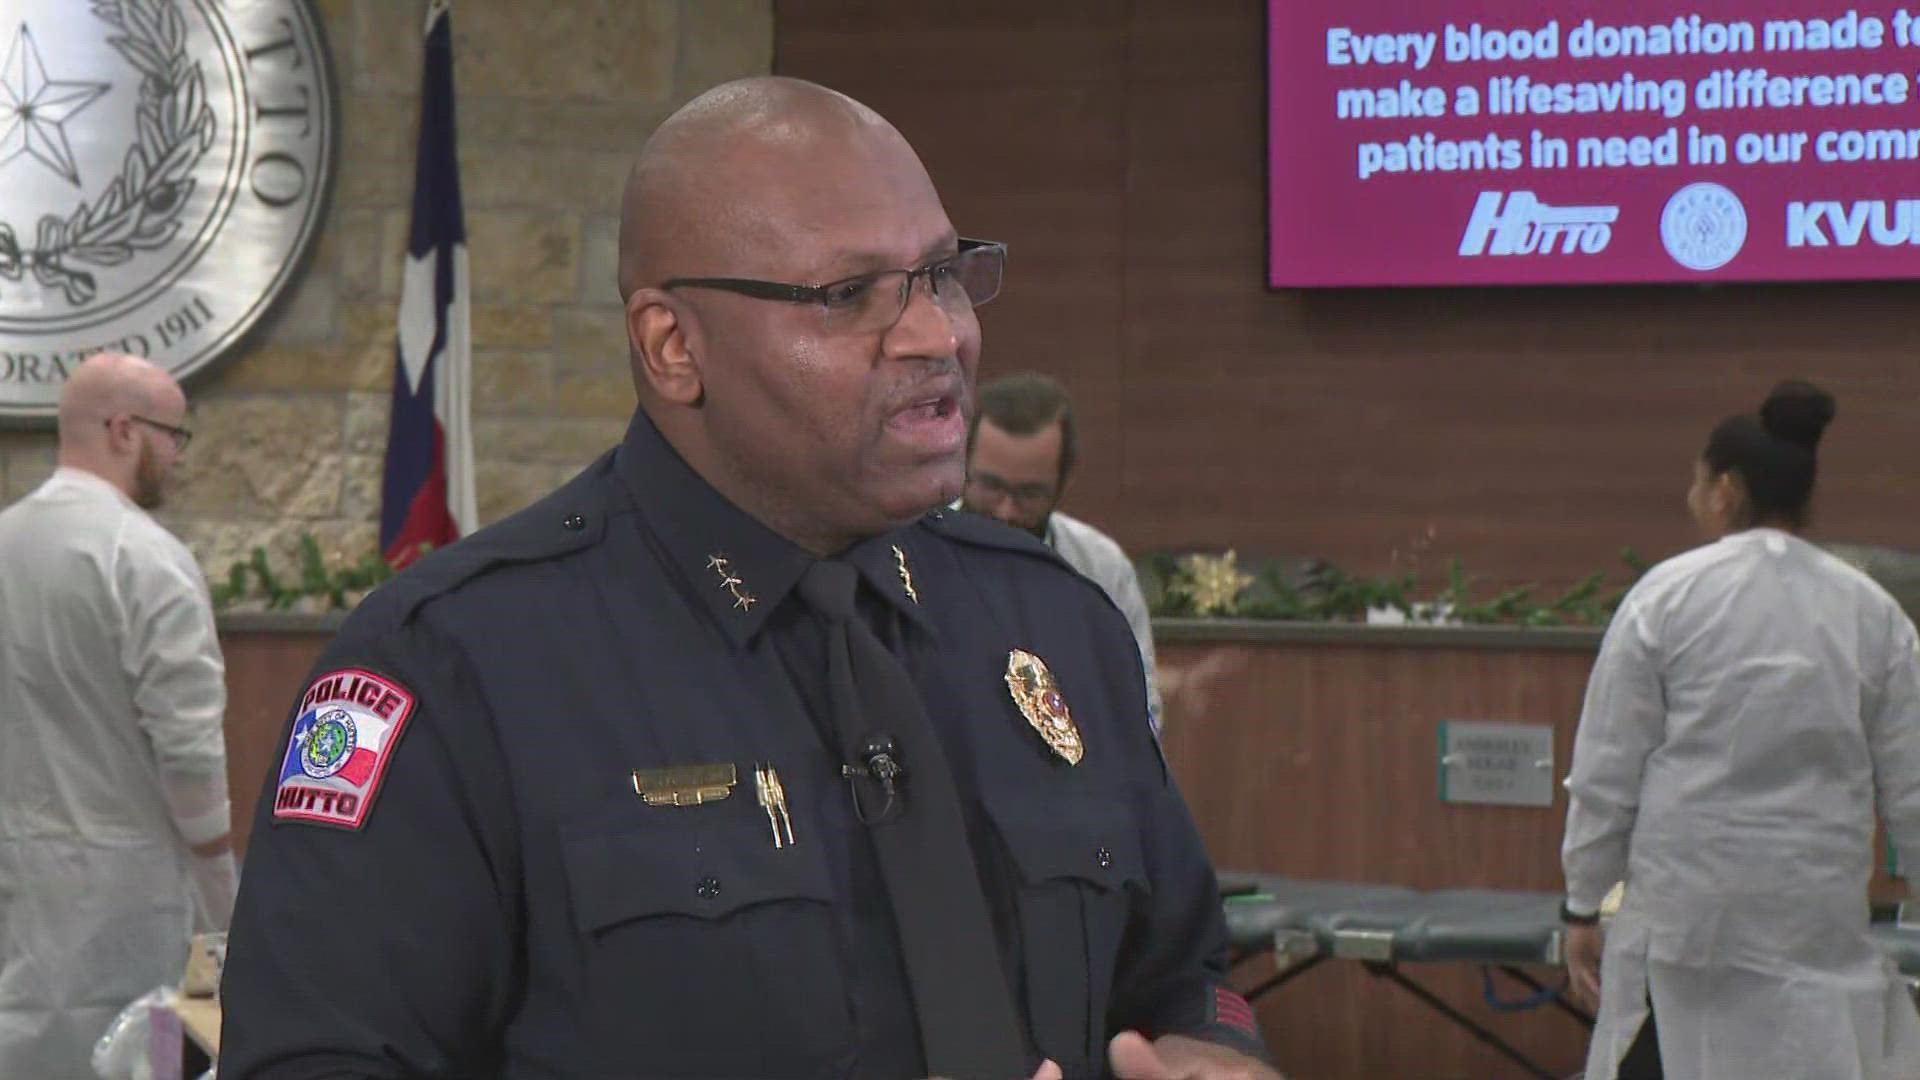 The City of Hutto is partnering with KVUE and We Are Blood for "Hutto Has Heart." The chief of police explains why donating blood should be celebrated.